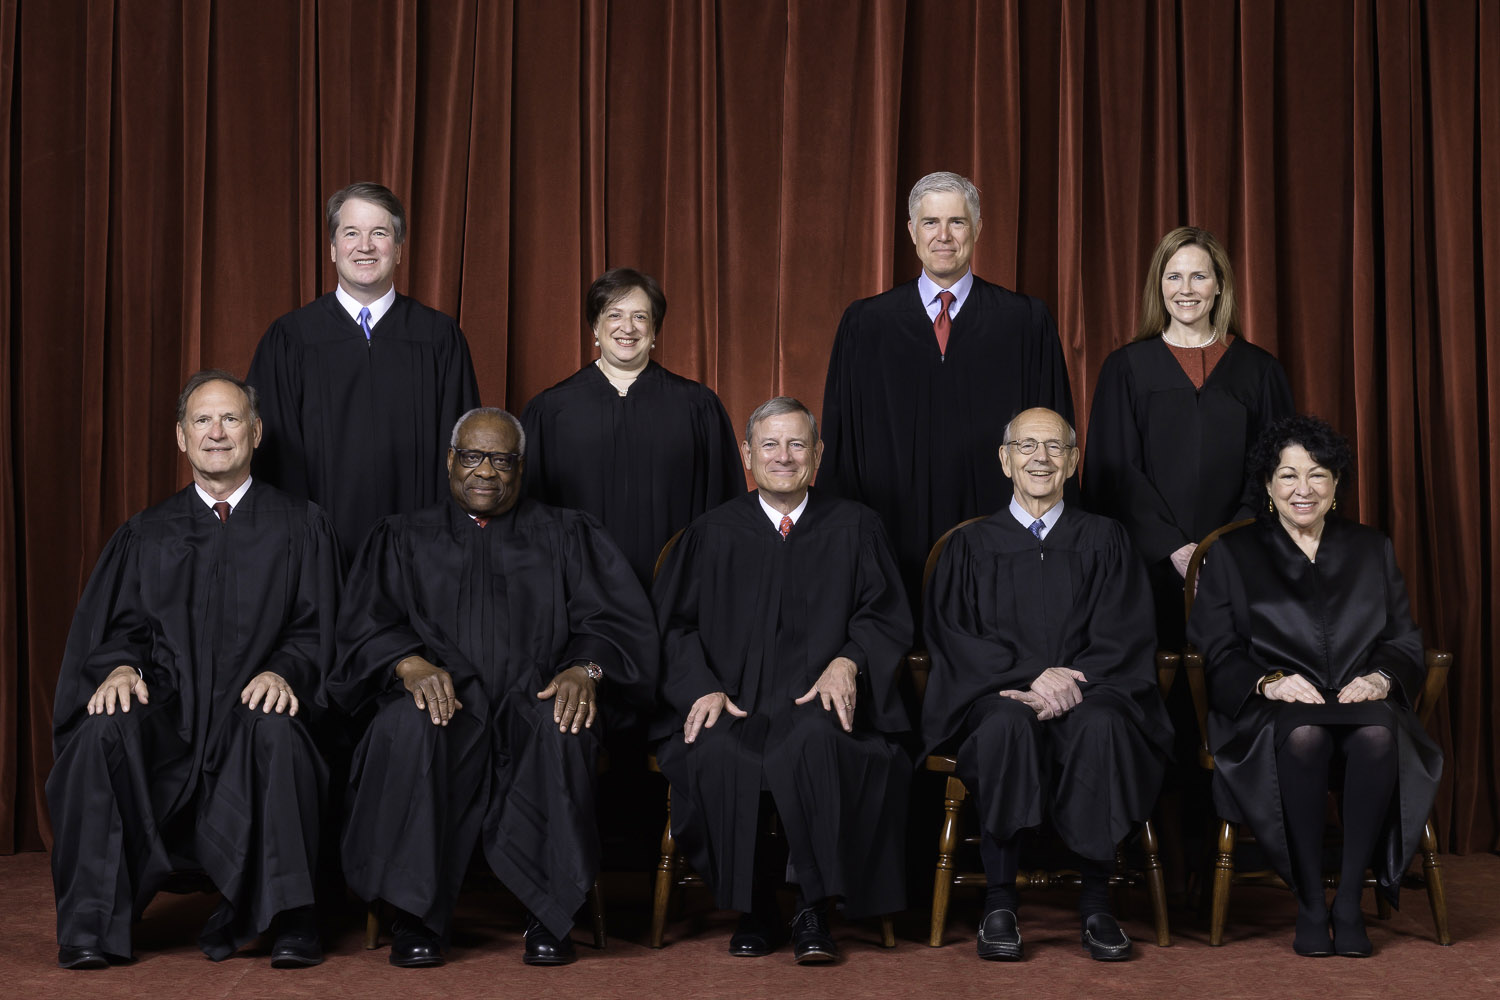 Less travel, plenty of royalties for justices in 2020 - SCOTUSblog